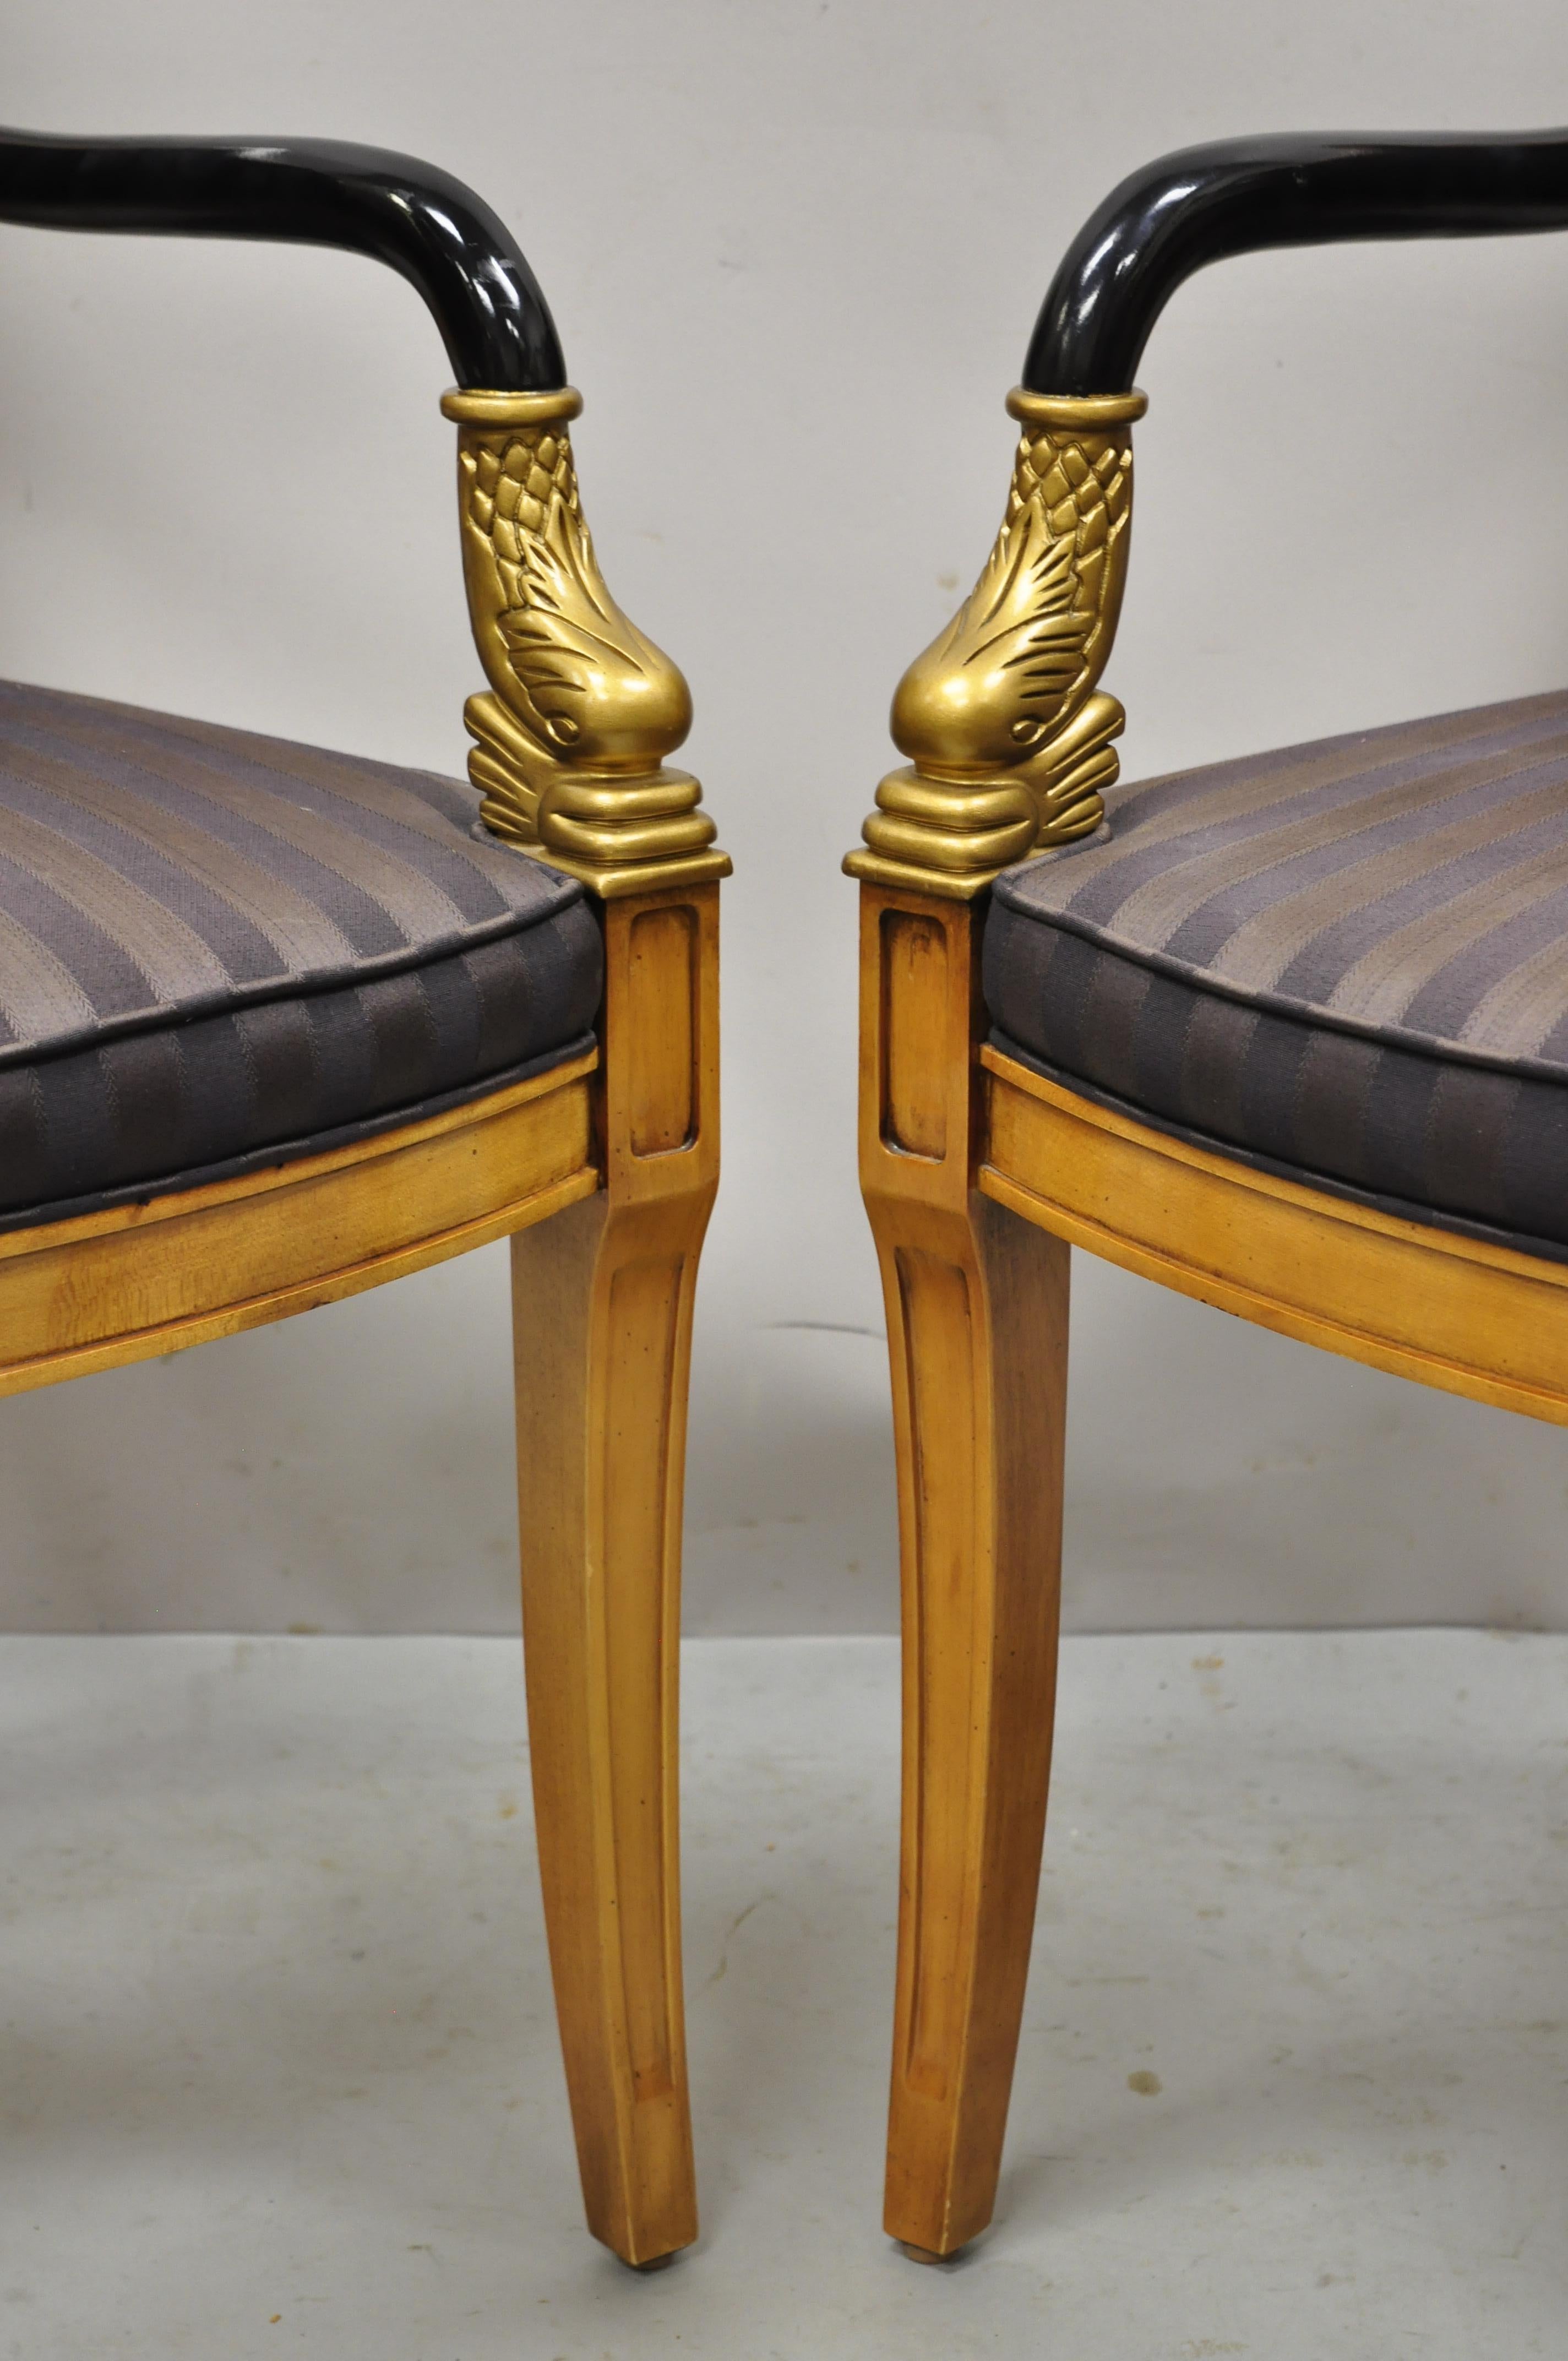 North American Century Furniture Co Capuan Biedermier Dining Chairs with Serpent Arm, Set of 8